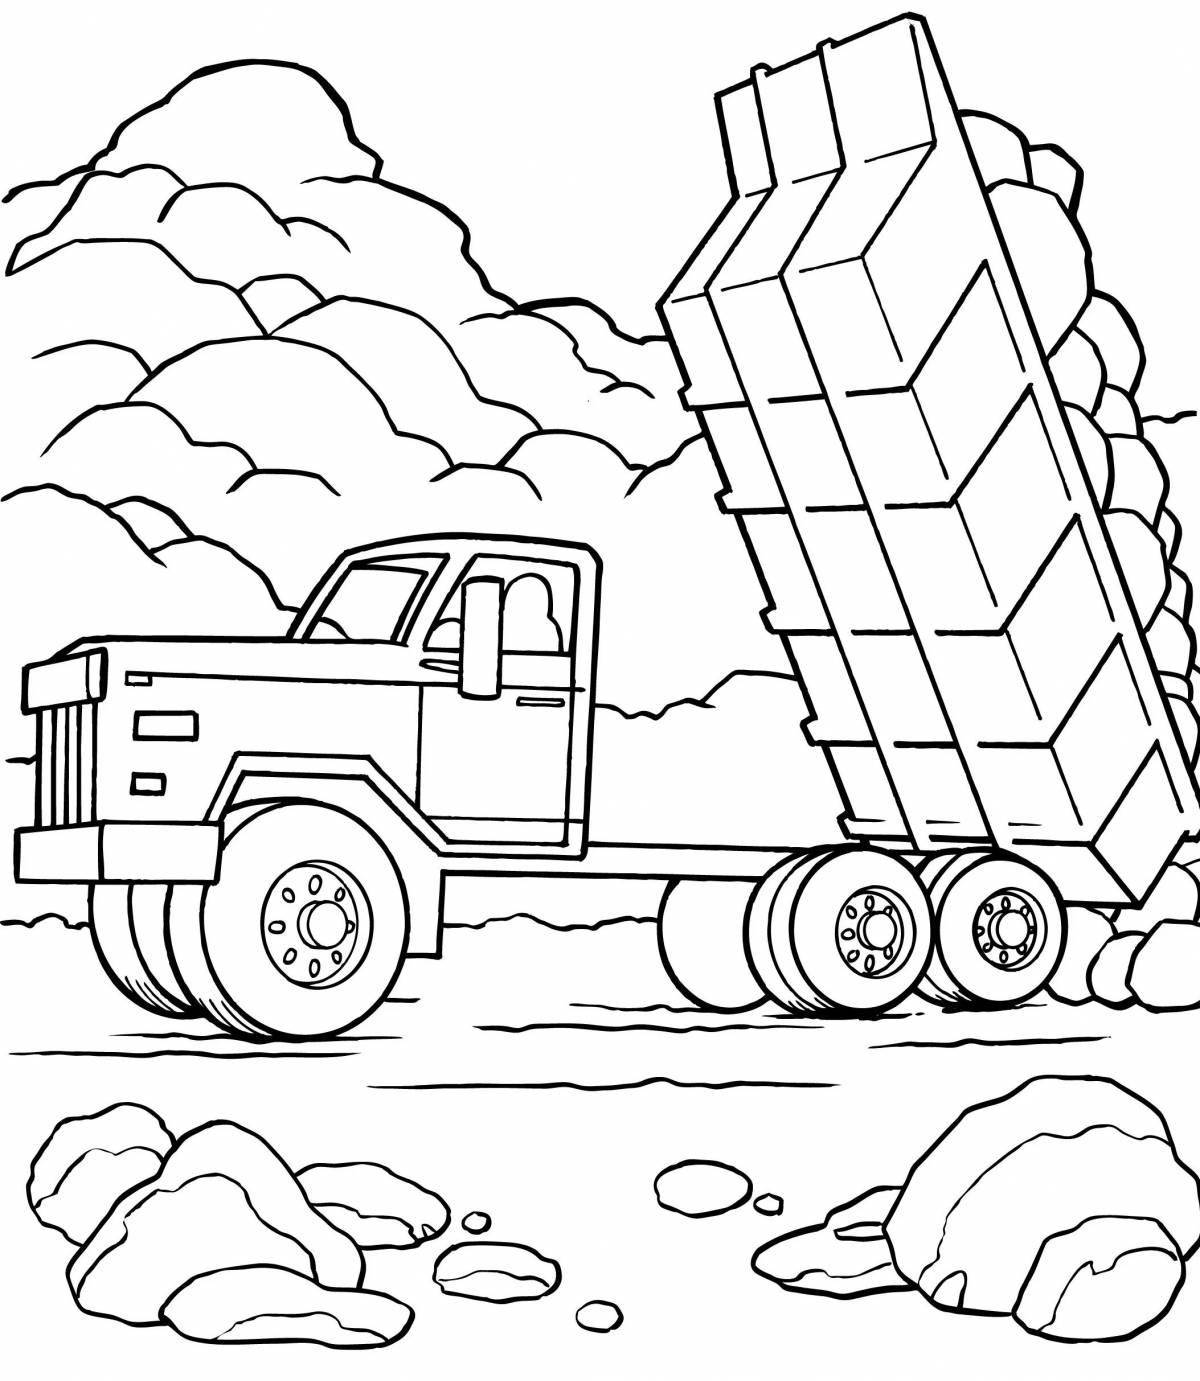 Gorgeous dump truck coloring book for kids